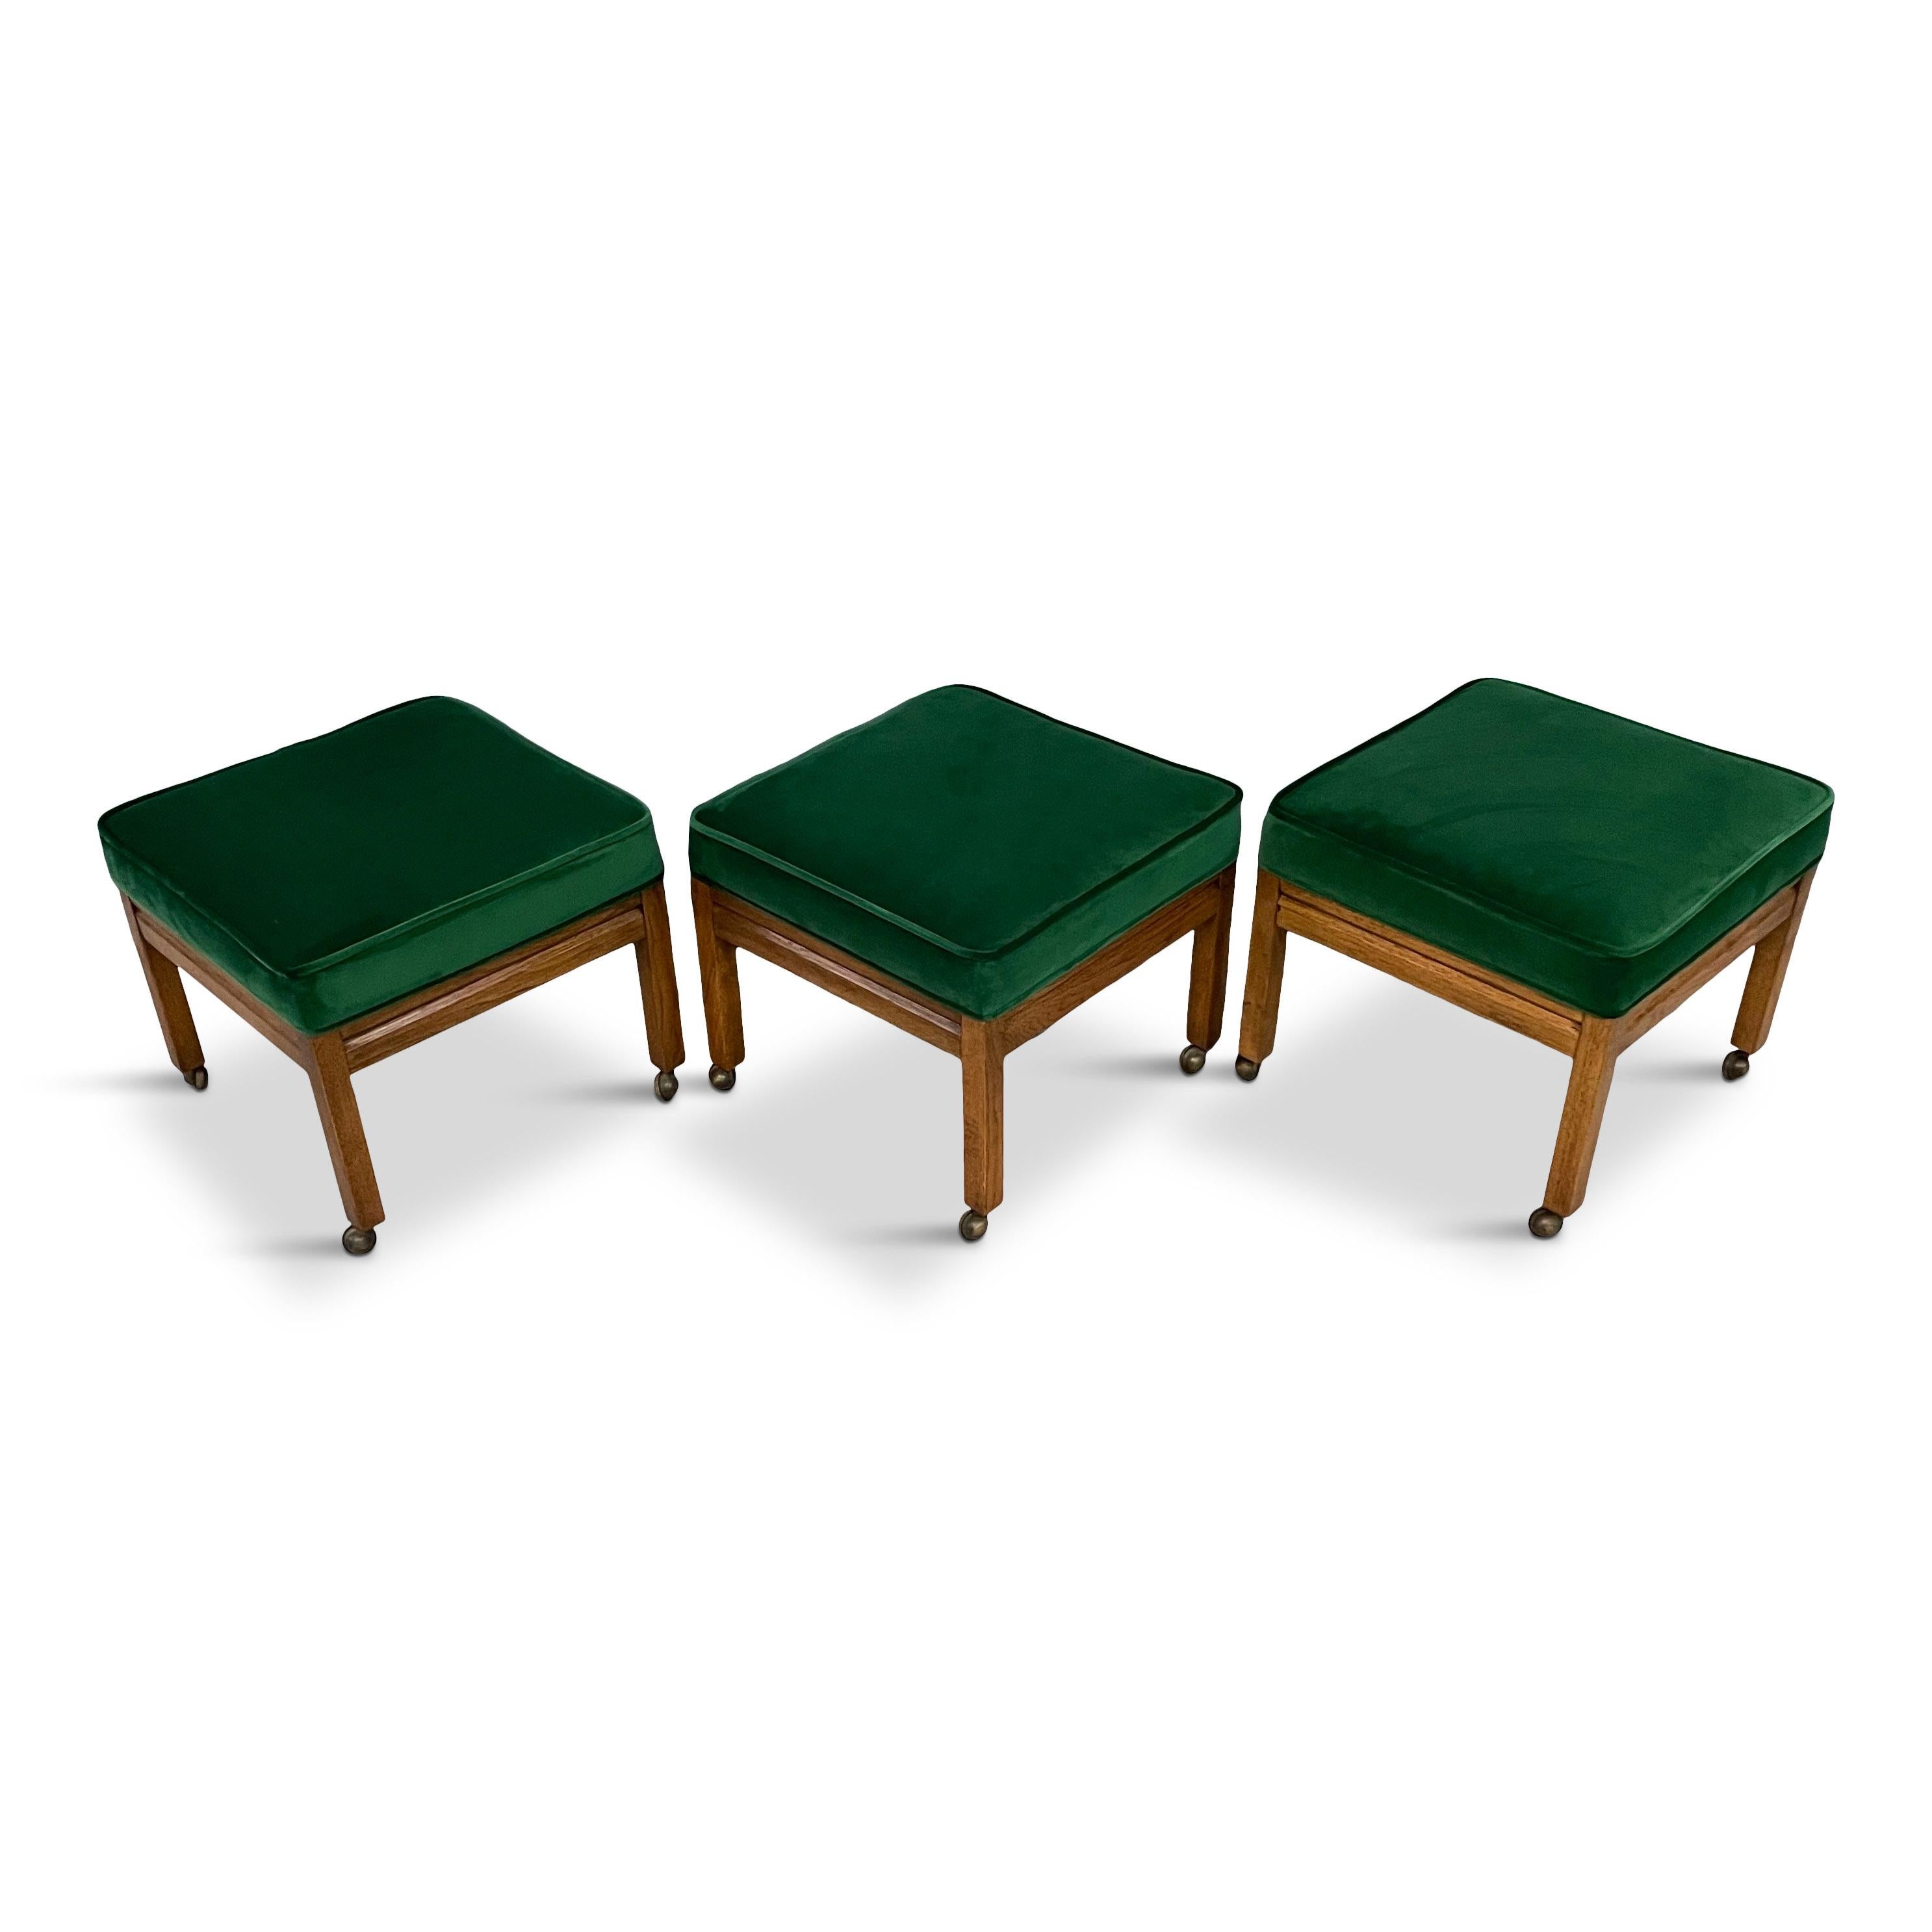 This trio of stools have been lovingly reupholstered in a wonderful emerald velvet that enhances the beauty of the pecan wood base. These stools have casters that you can keep or I'll remove them if you don't like them.